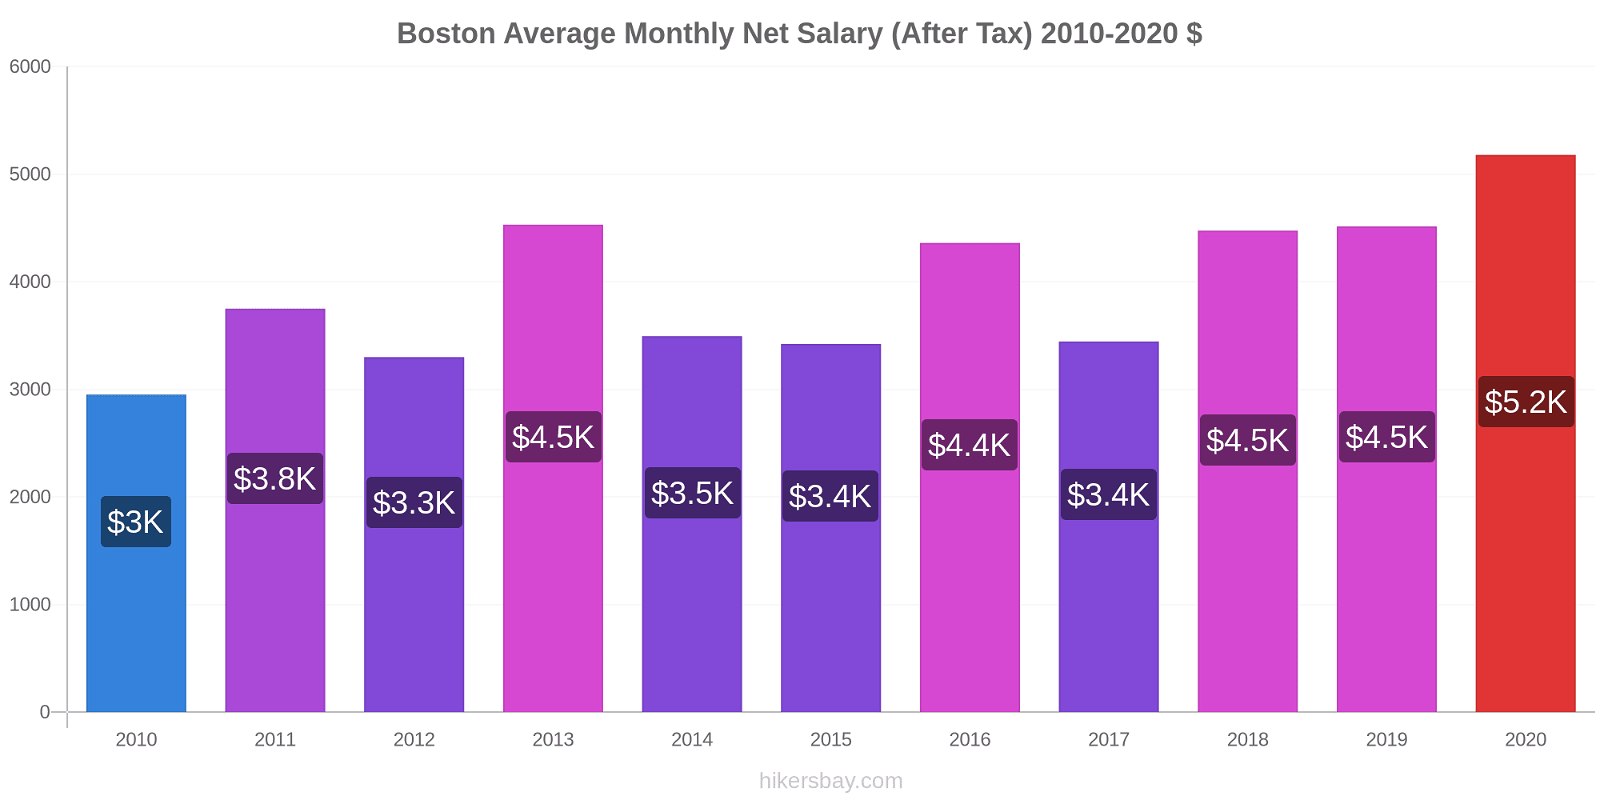 Boston price changes Average Monthly Net Salary (After Tax) hikersbay.com